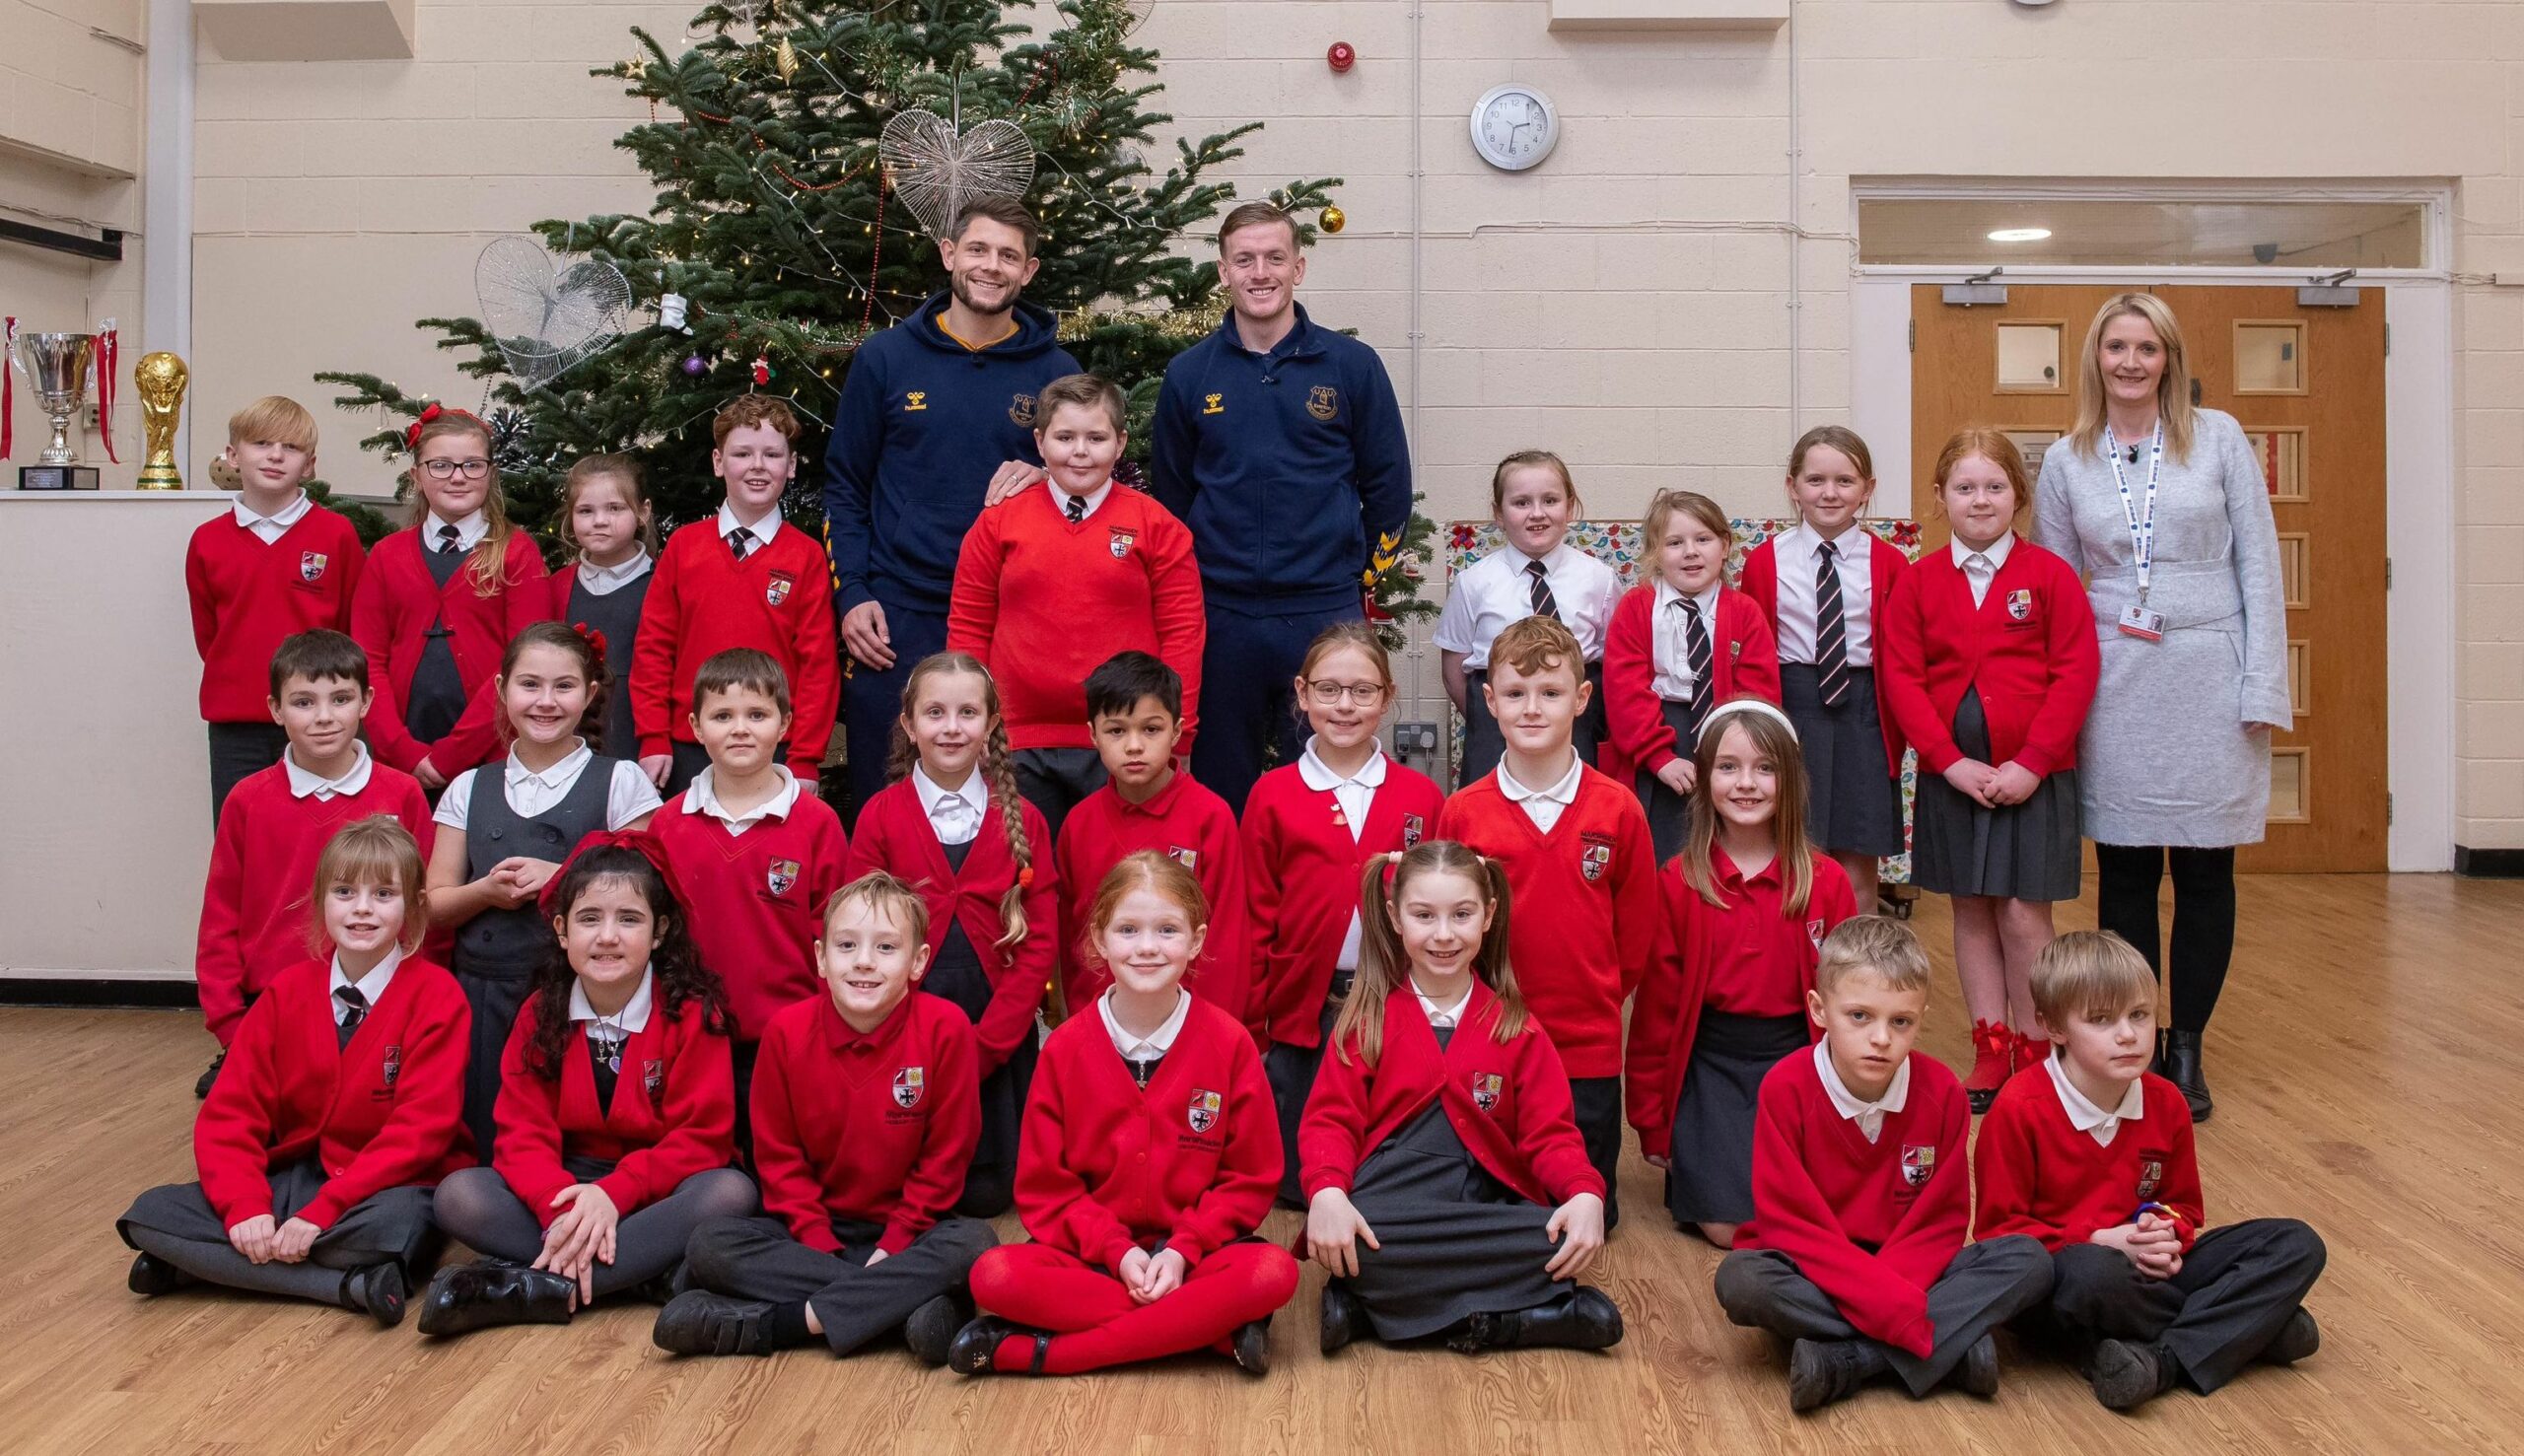 Thomas Ralphs, a pupil at Marshside Primary School in Southport, got an early Christmas treat when two of his Everton FC heroes surprised him midway through a school carol rehearsal. Photo by Everton FC